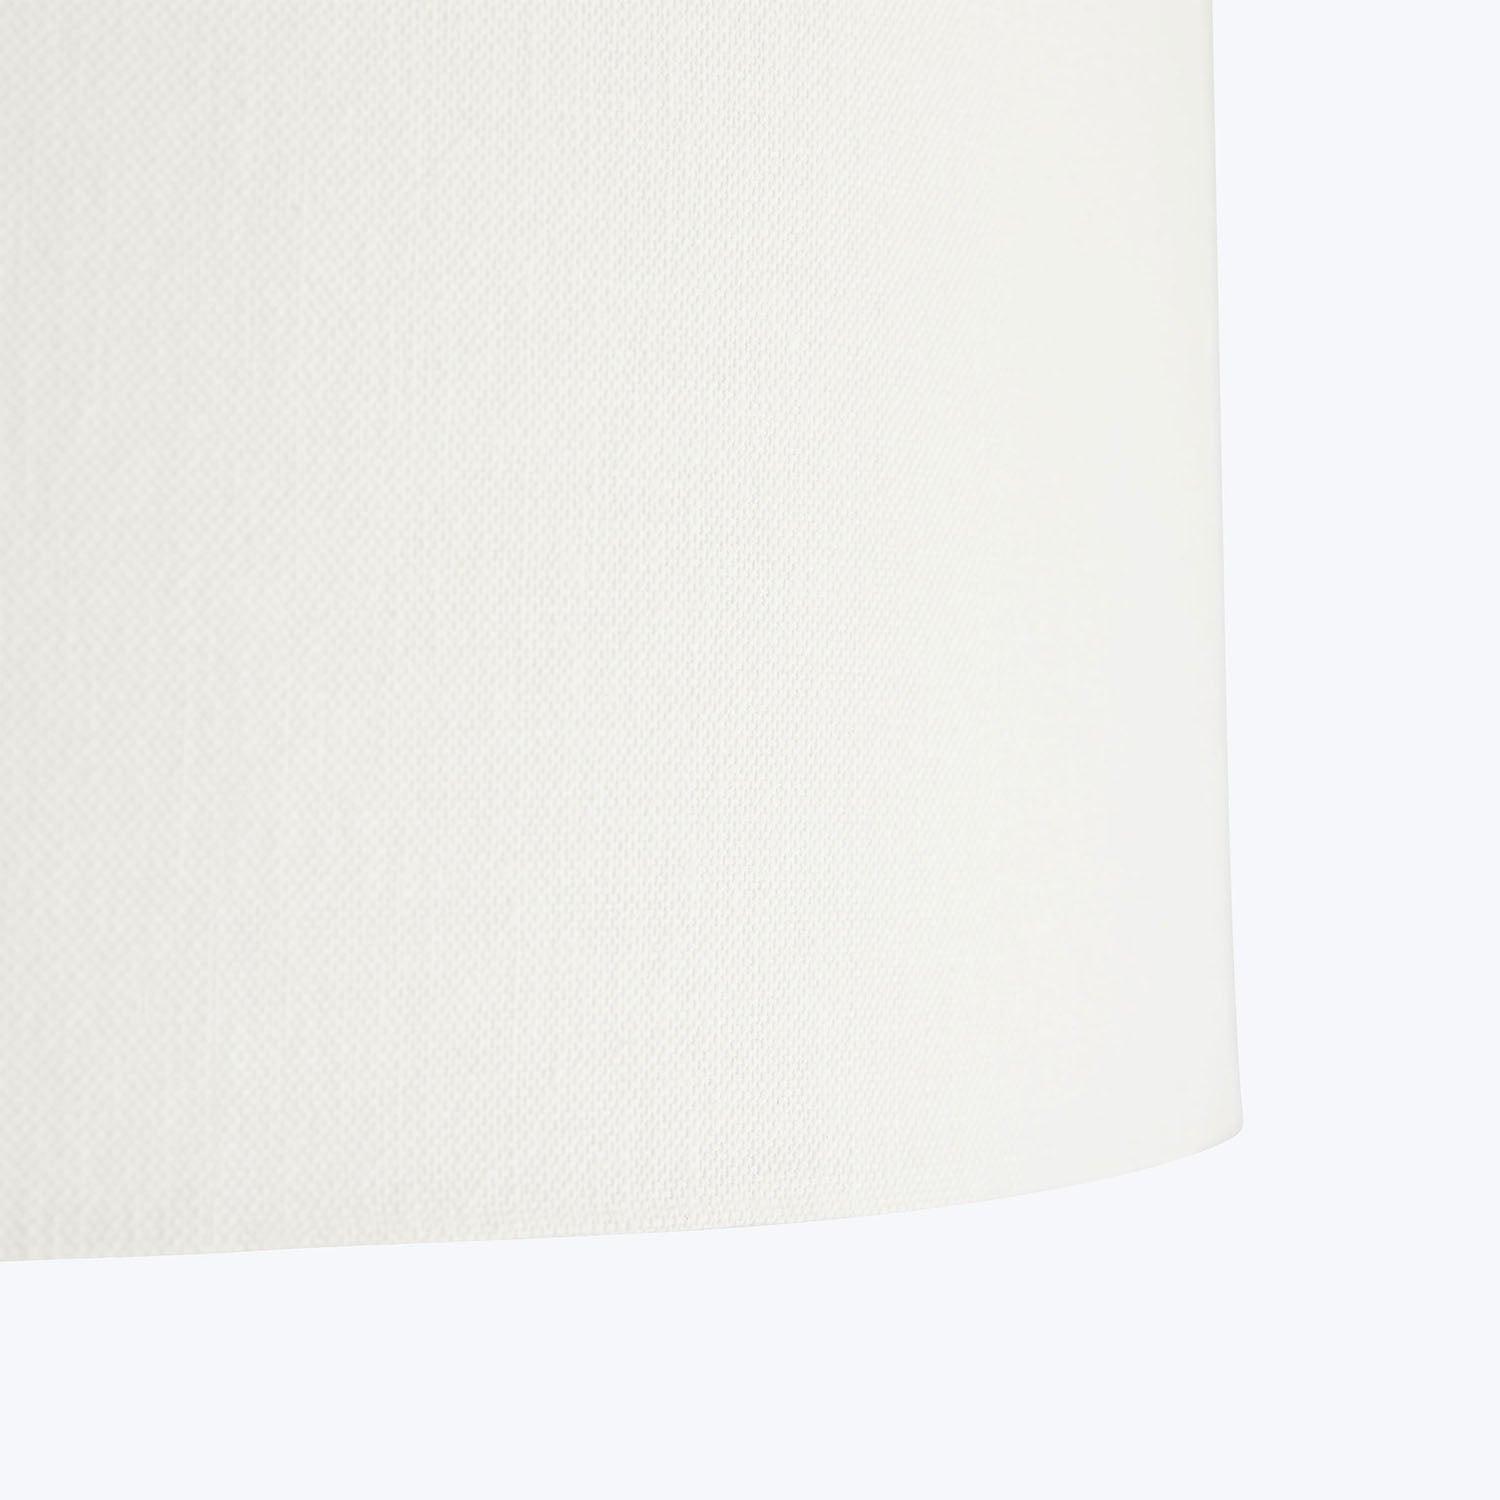 Off-white textured material with a subtle fold. Soft lighting.